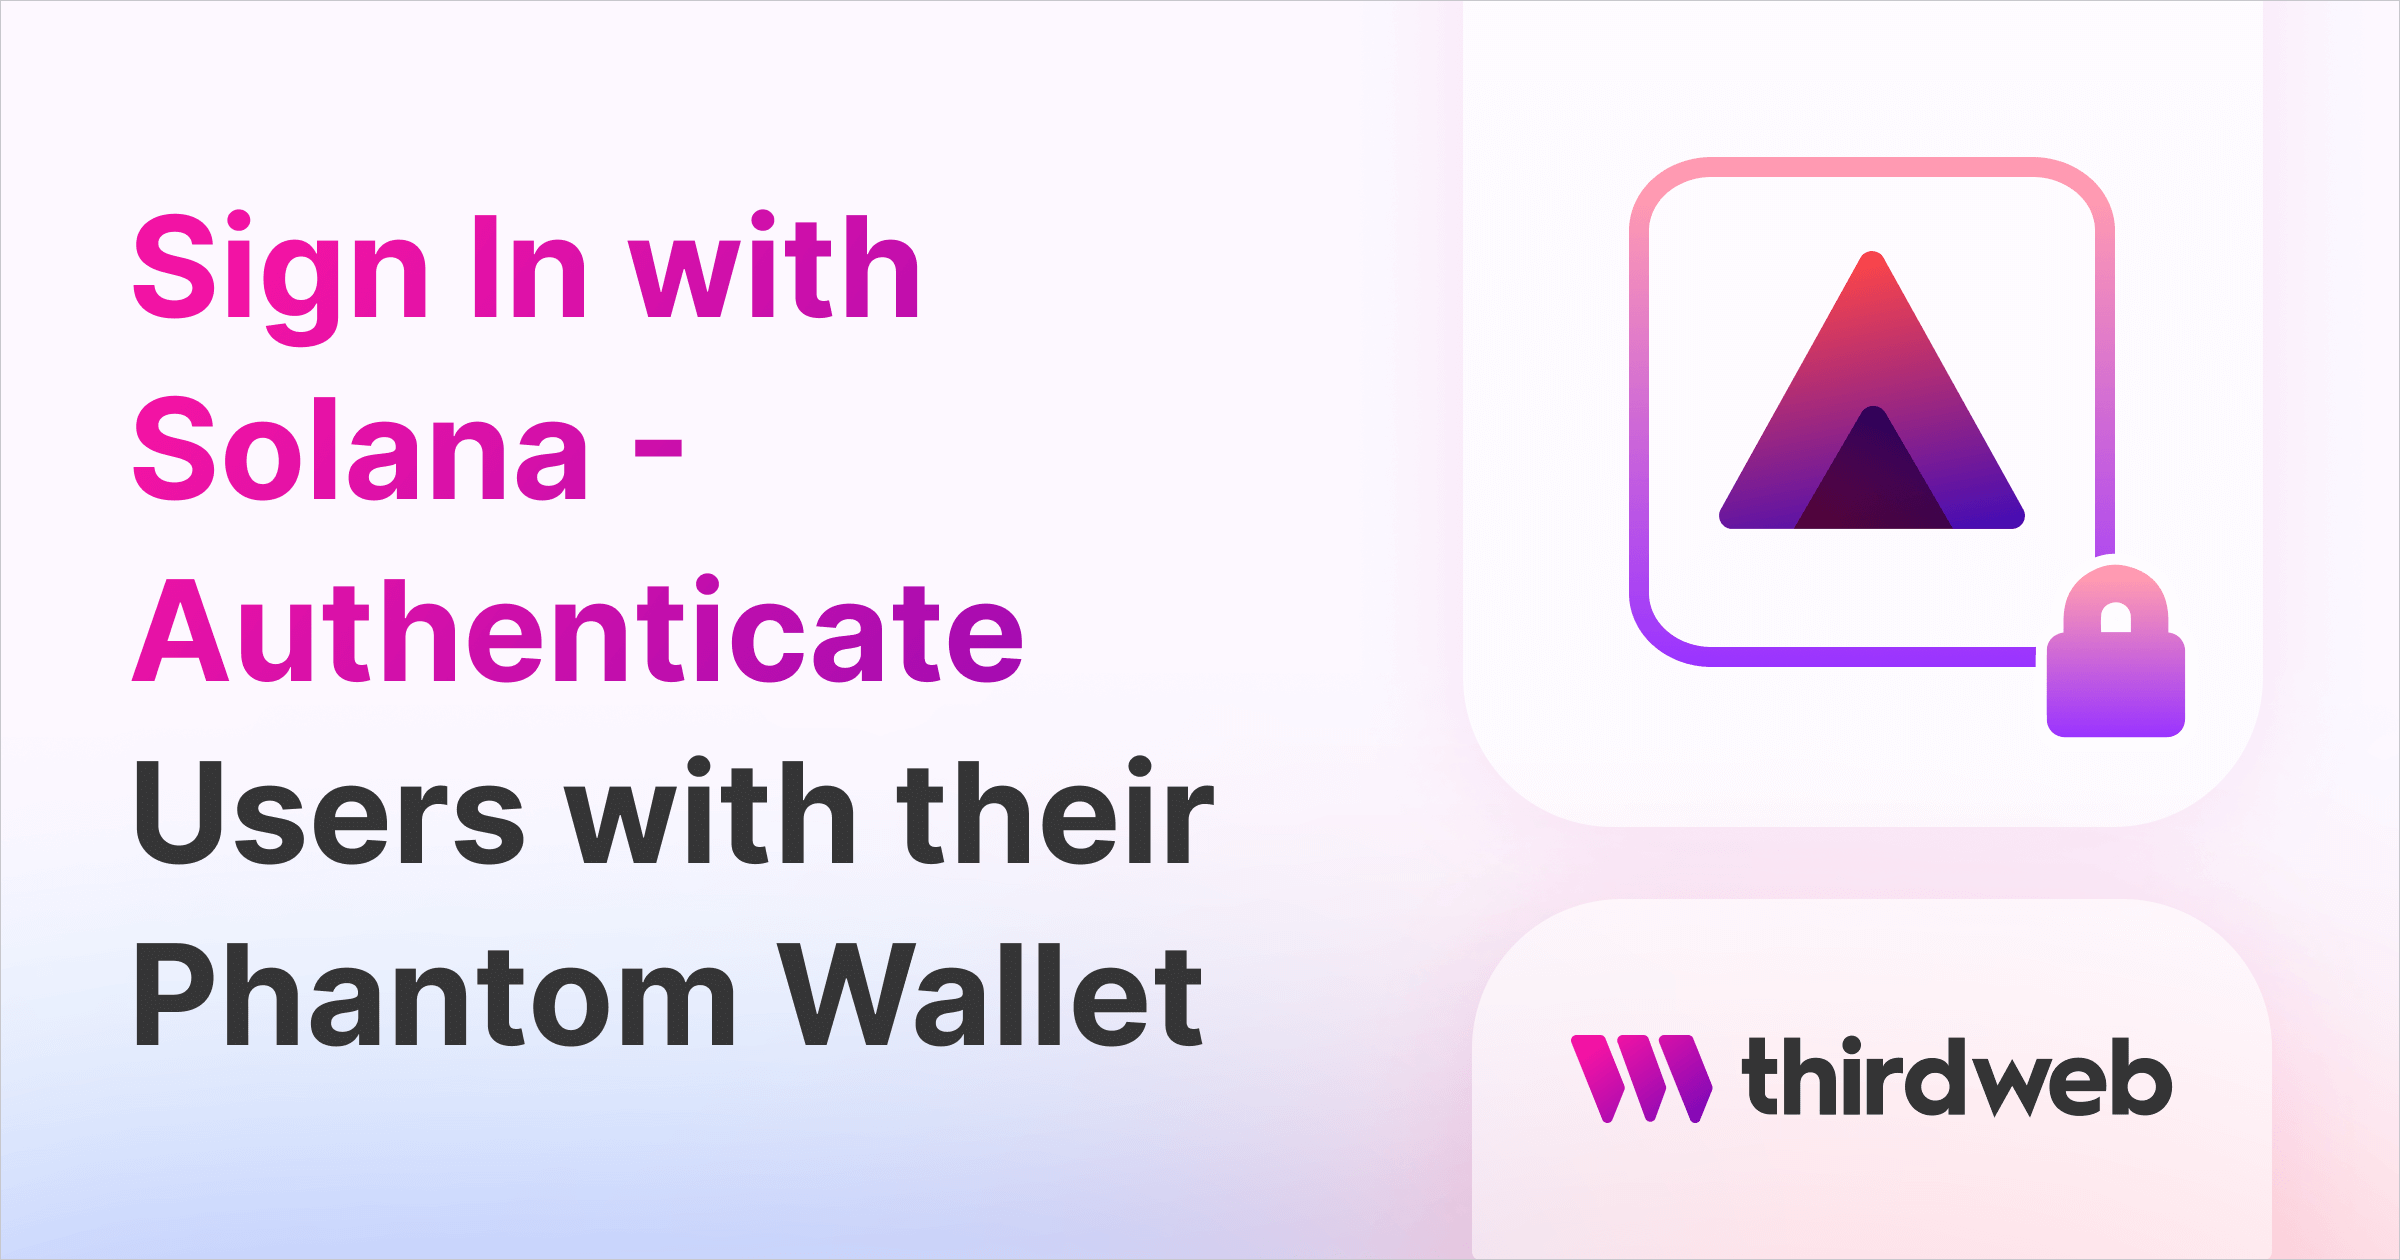 Sign In with Solana - Authenticate Users with their Phantom Wallet - thirdweb Guides